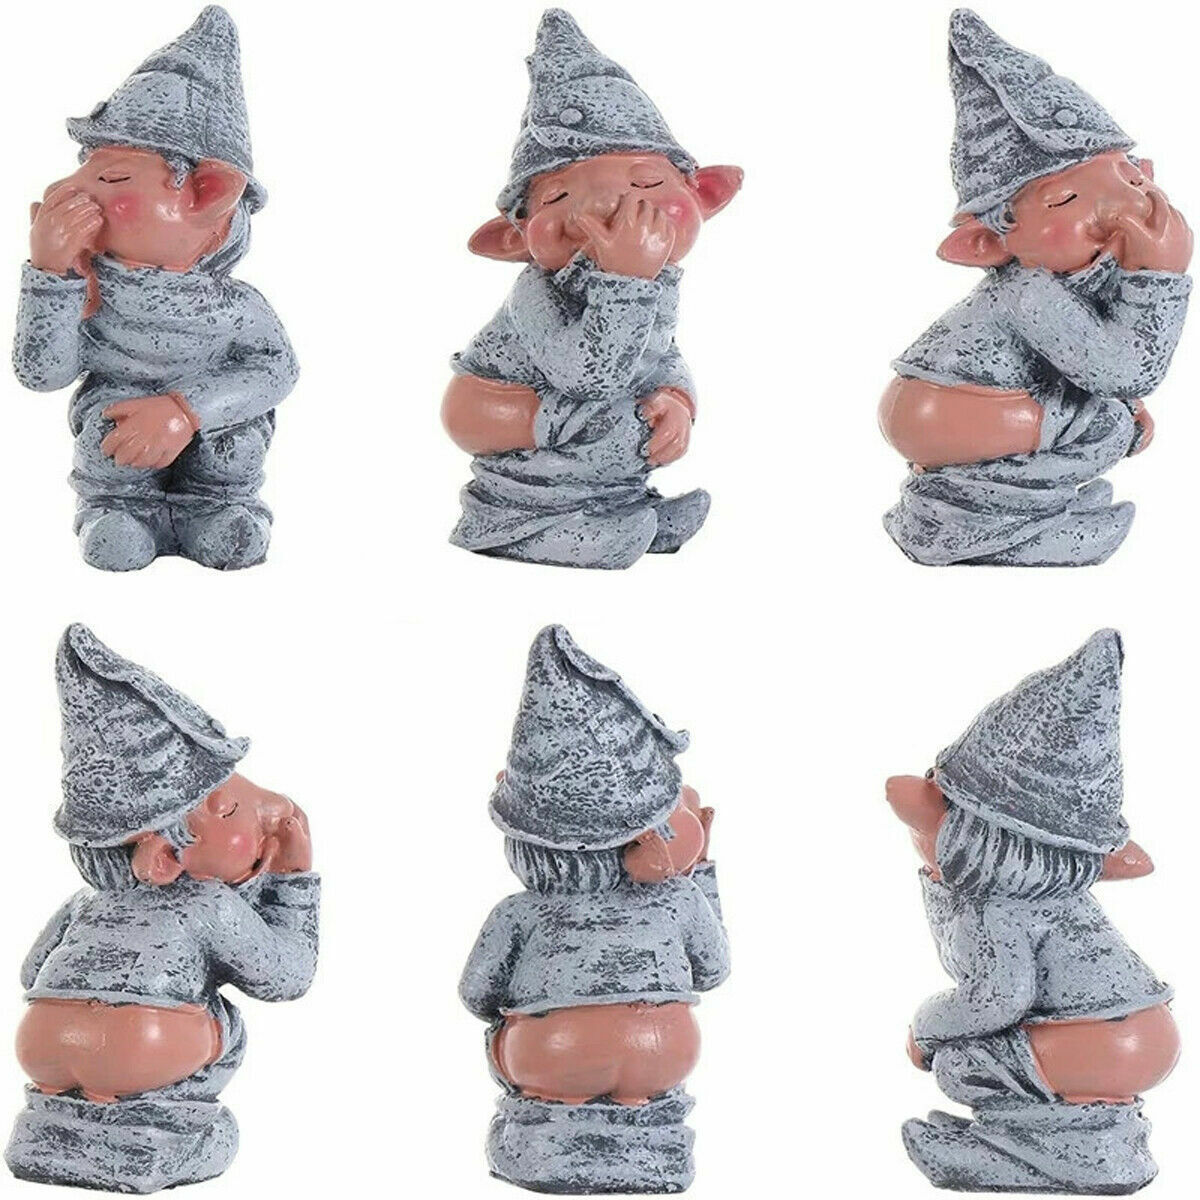 Primary image for Naughty Pooping Garden Gnome Funny Ornament Home Miniature Statue Resin Dwarf Us